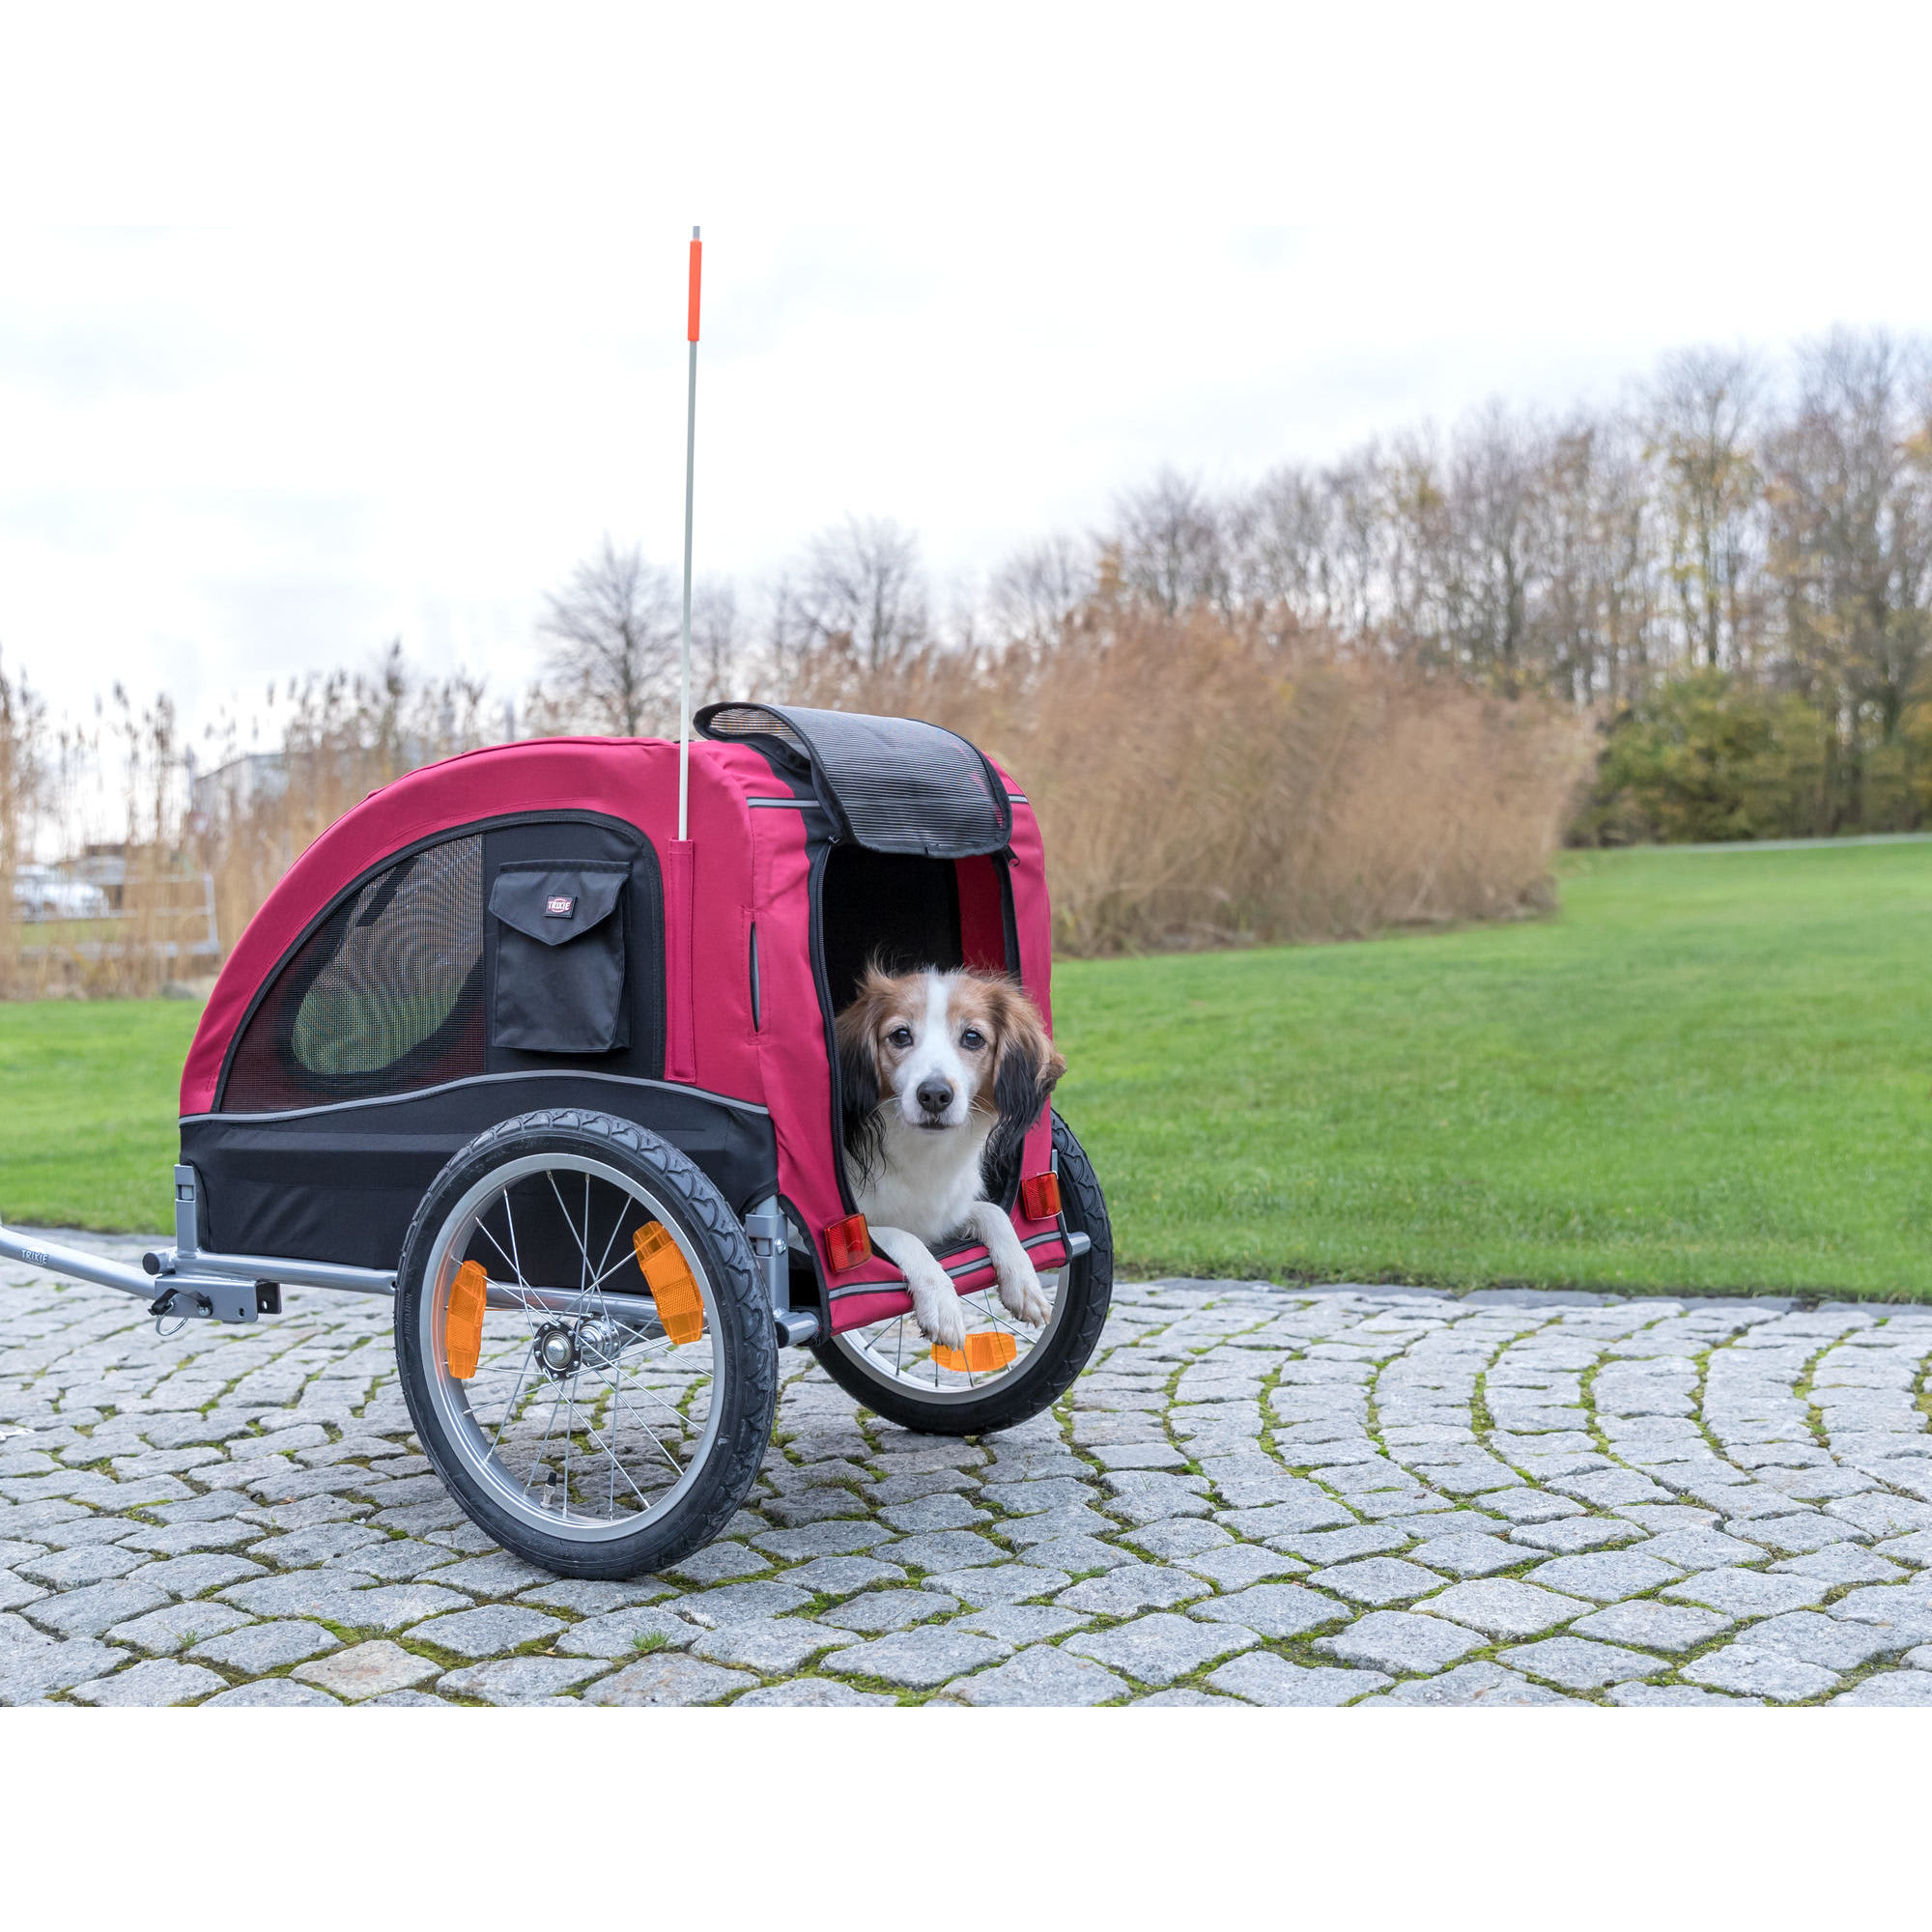 TRIXIE Bike Trailer for Dogs, Large